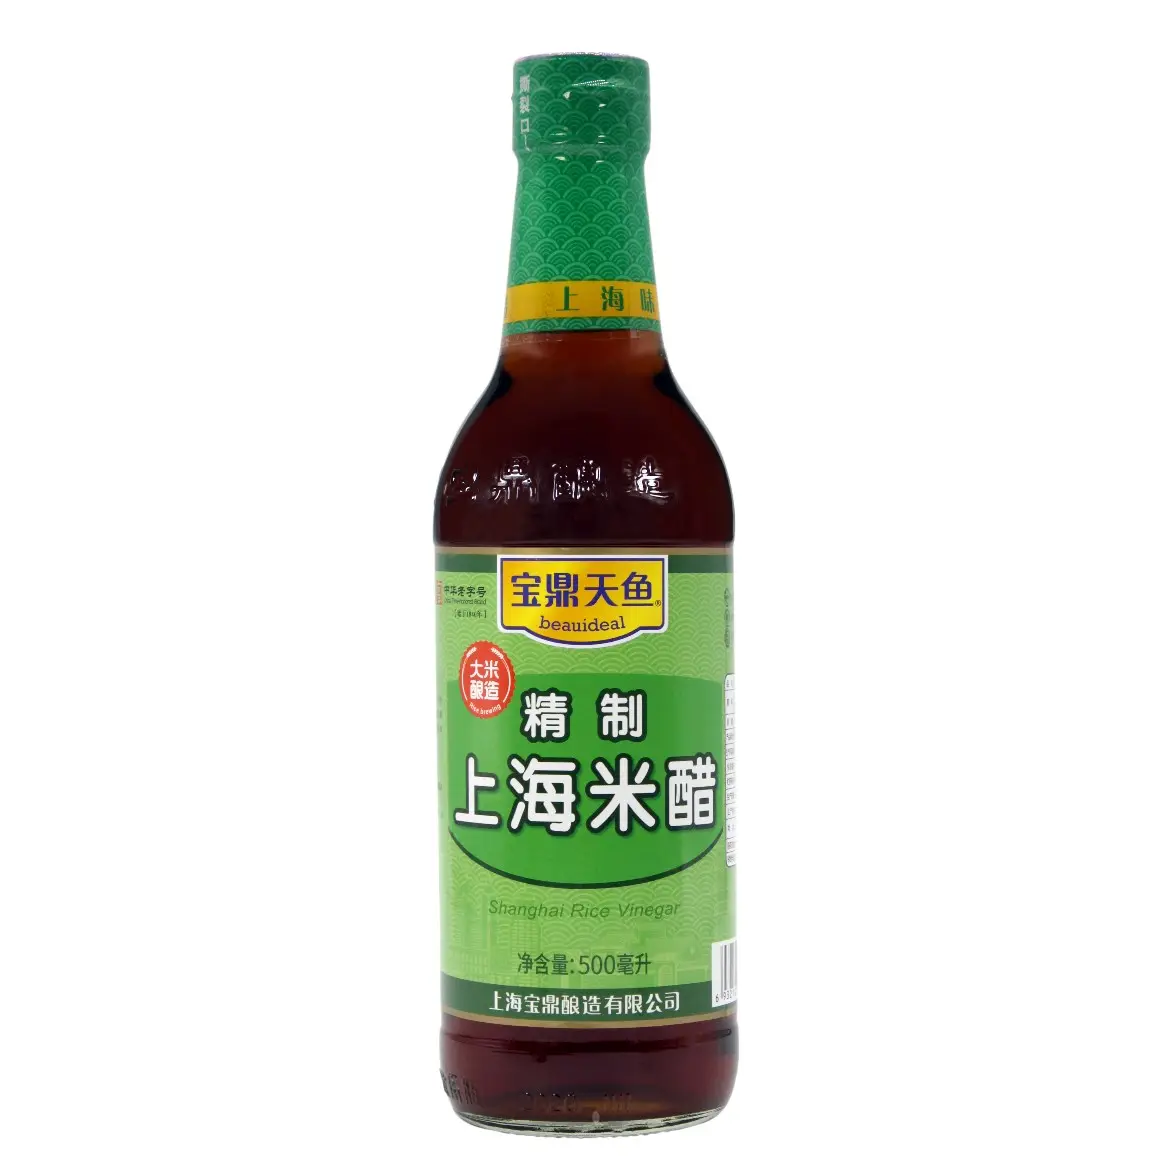 Durable Using Low Price 500ml Rice Wine Vinegar Baoding TianYu Beauideal